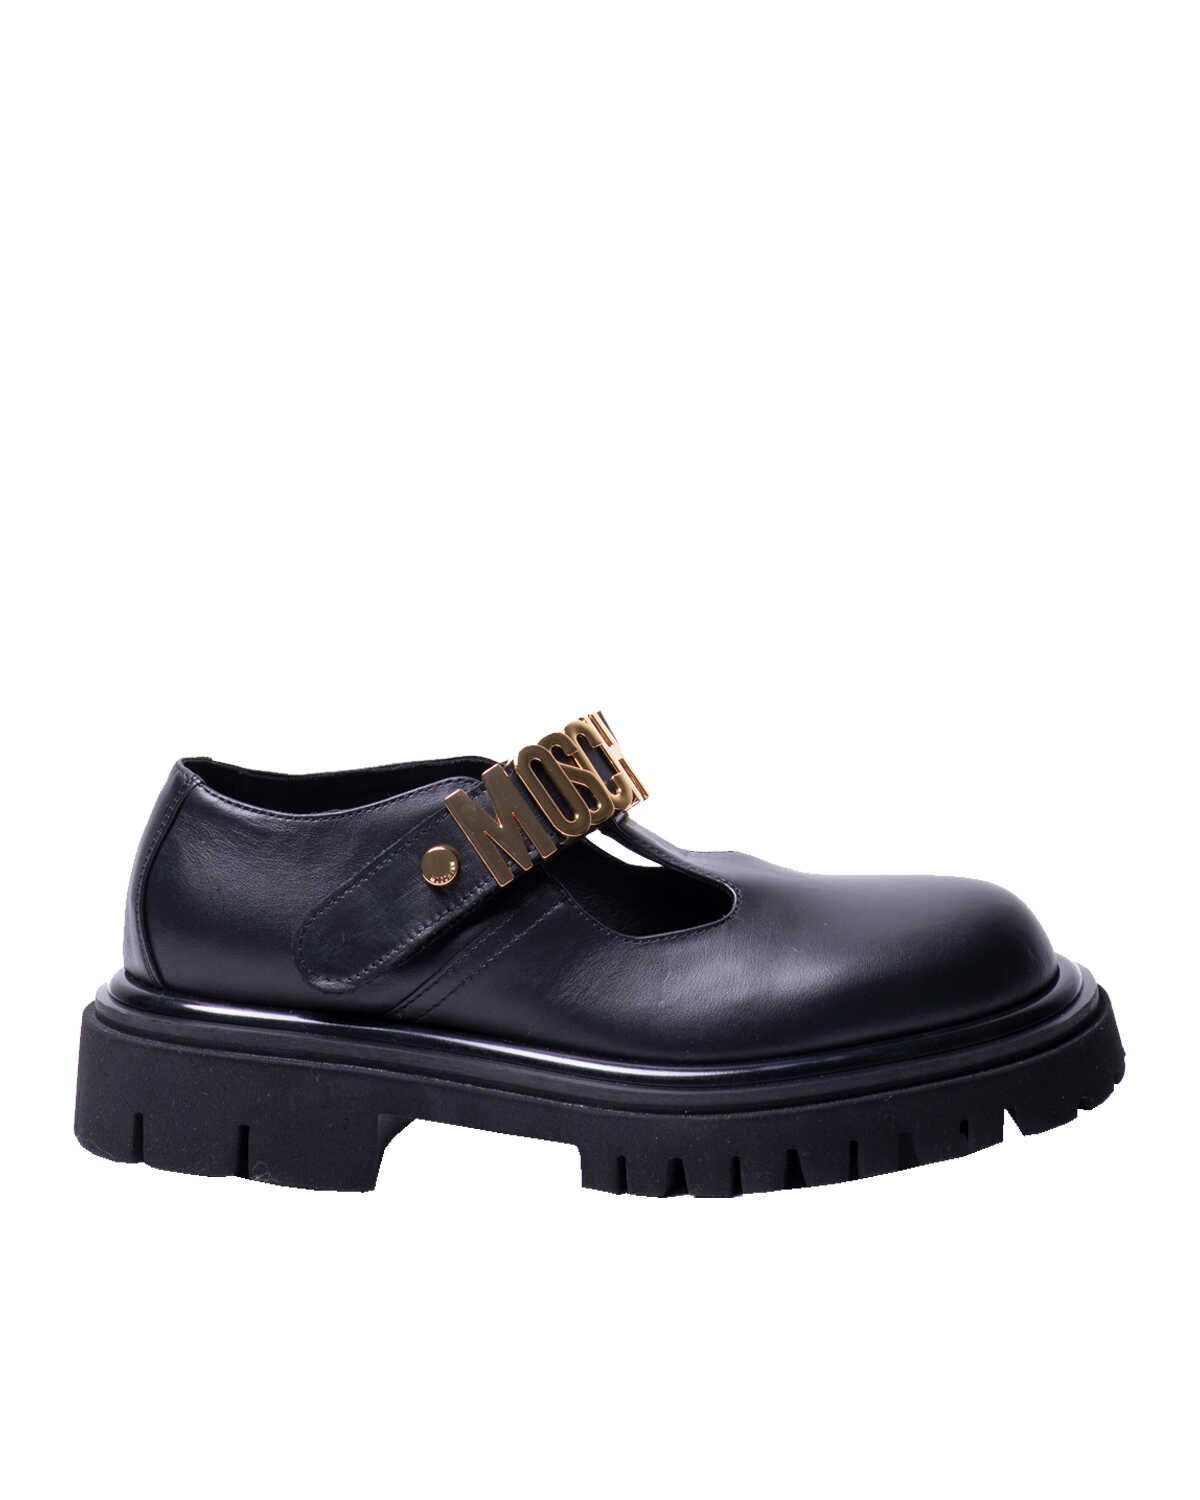 Moschino Metallic Letters Low Shoes NERO